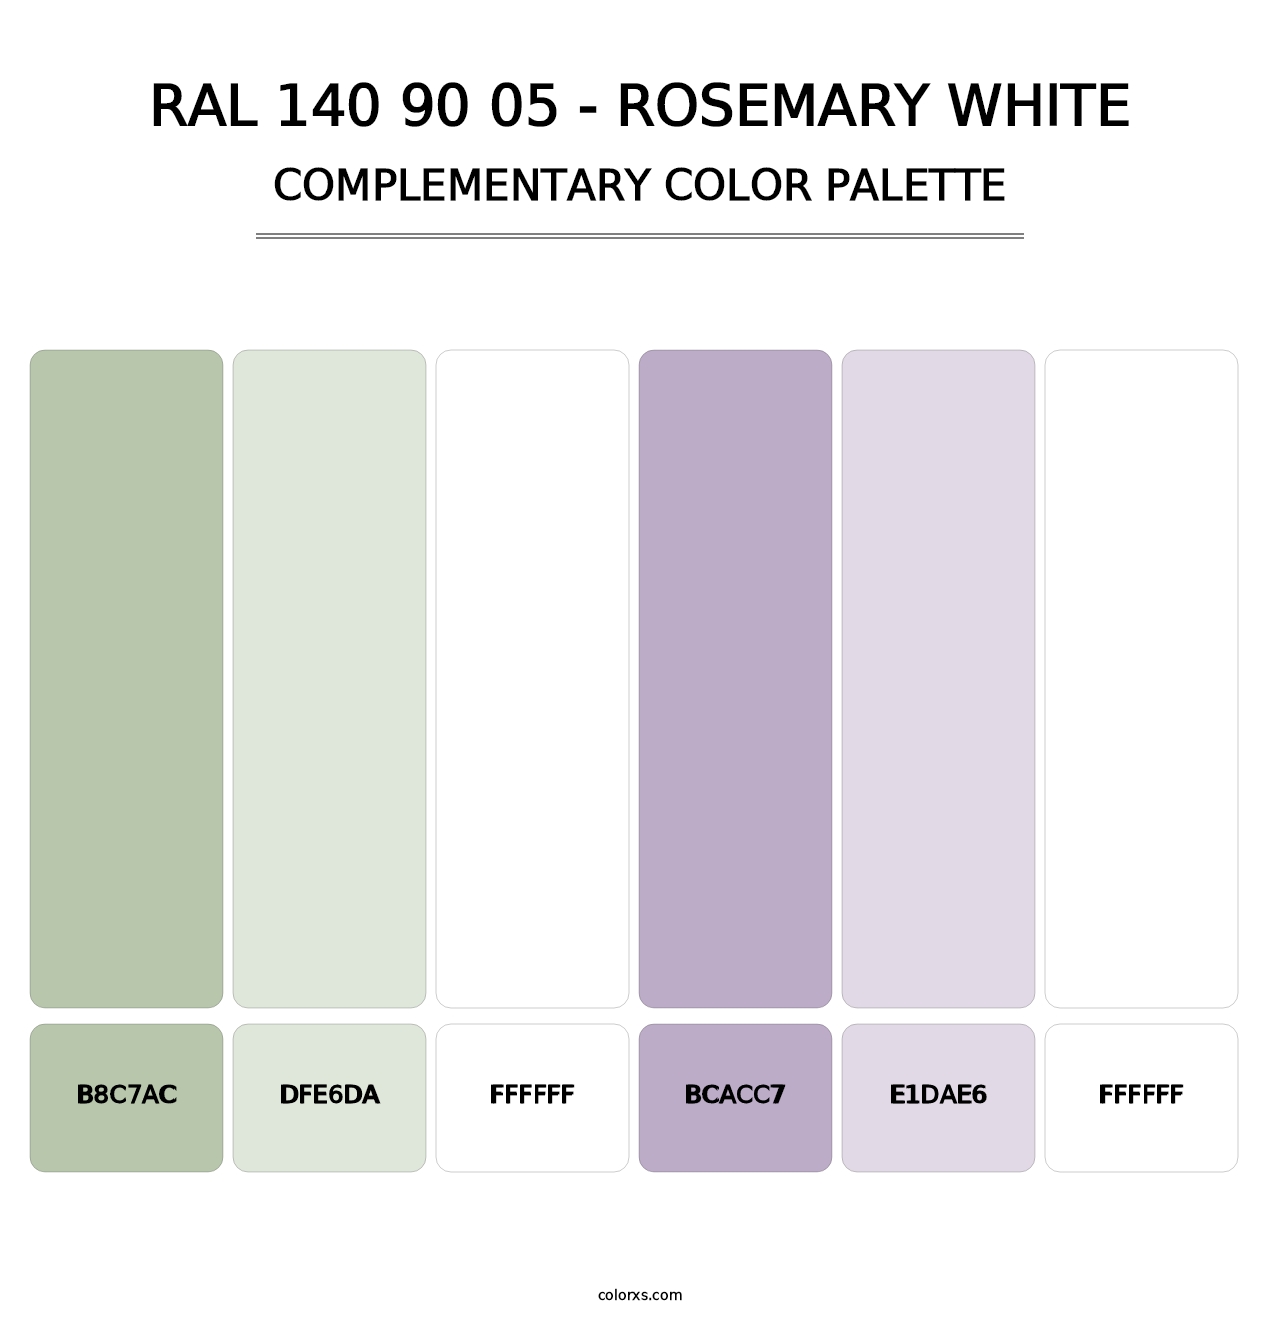 RAL 140 90 05 - Rosemary White - Complementary Color Palette